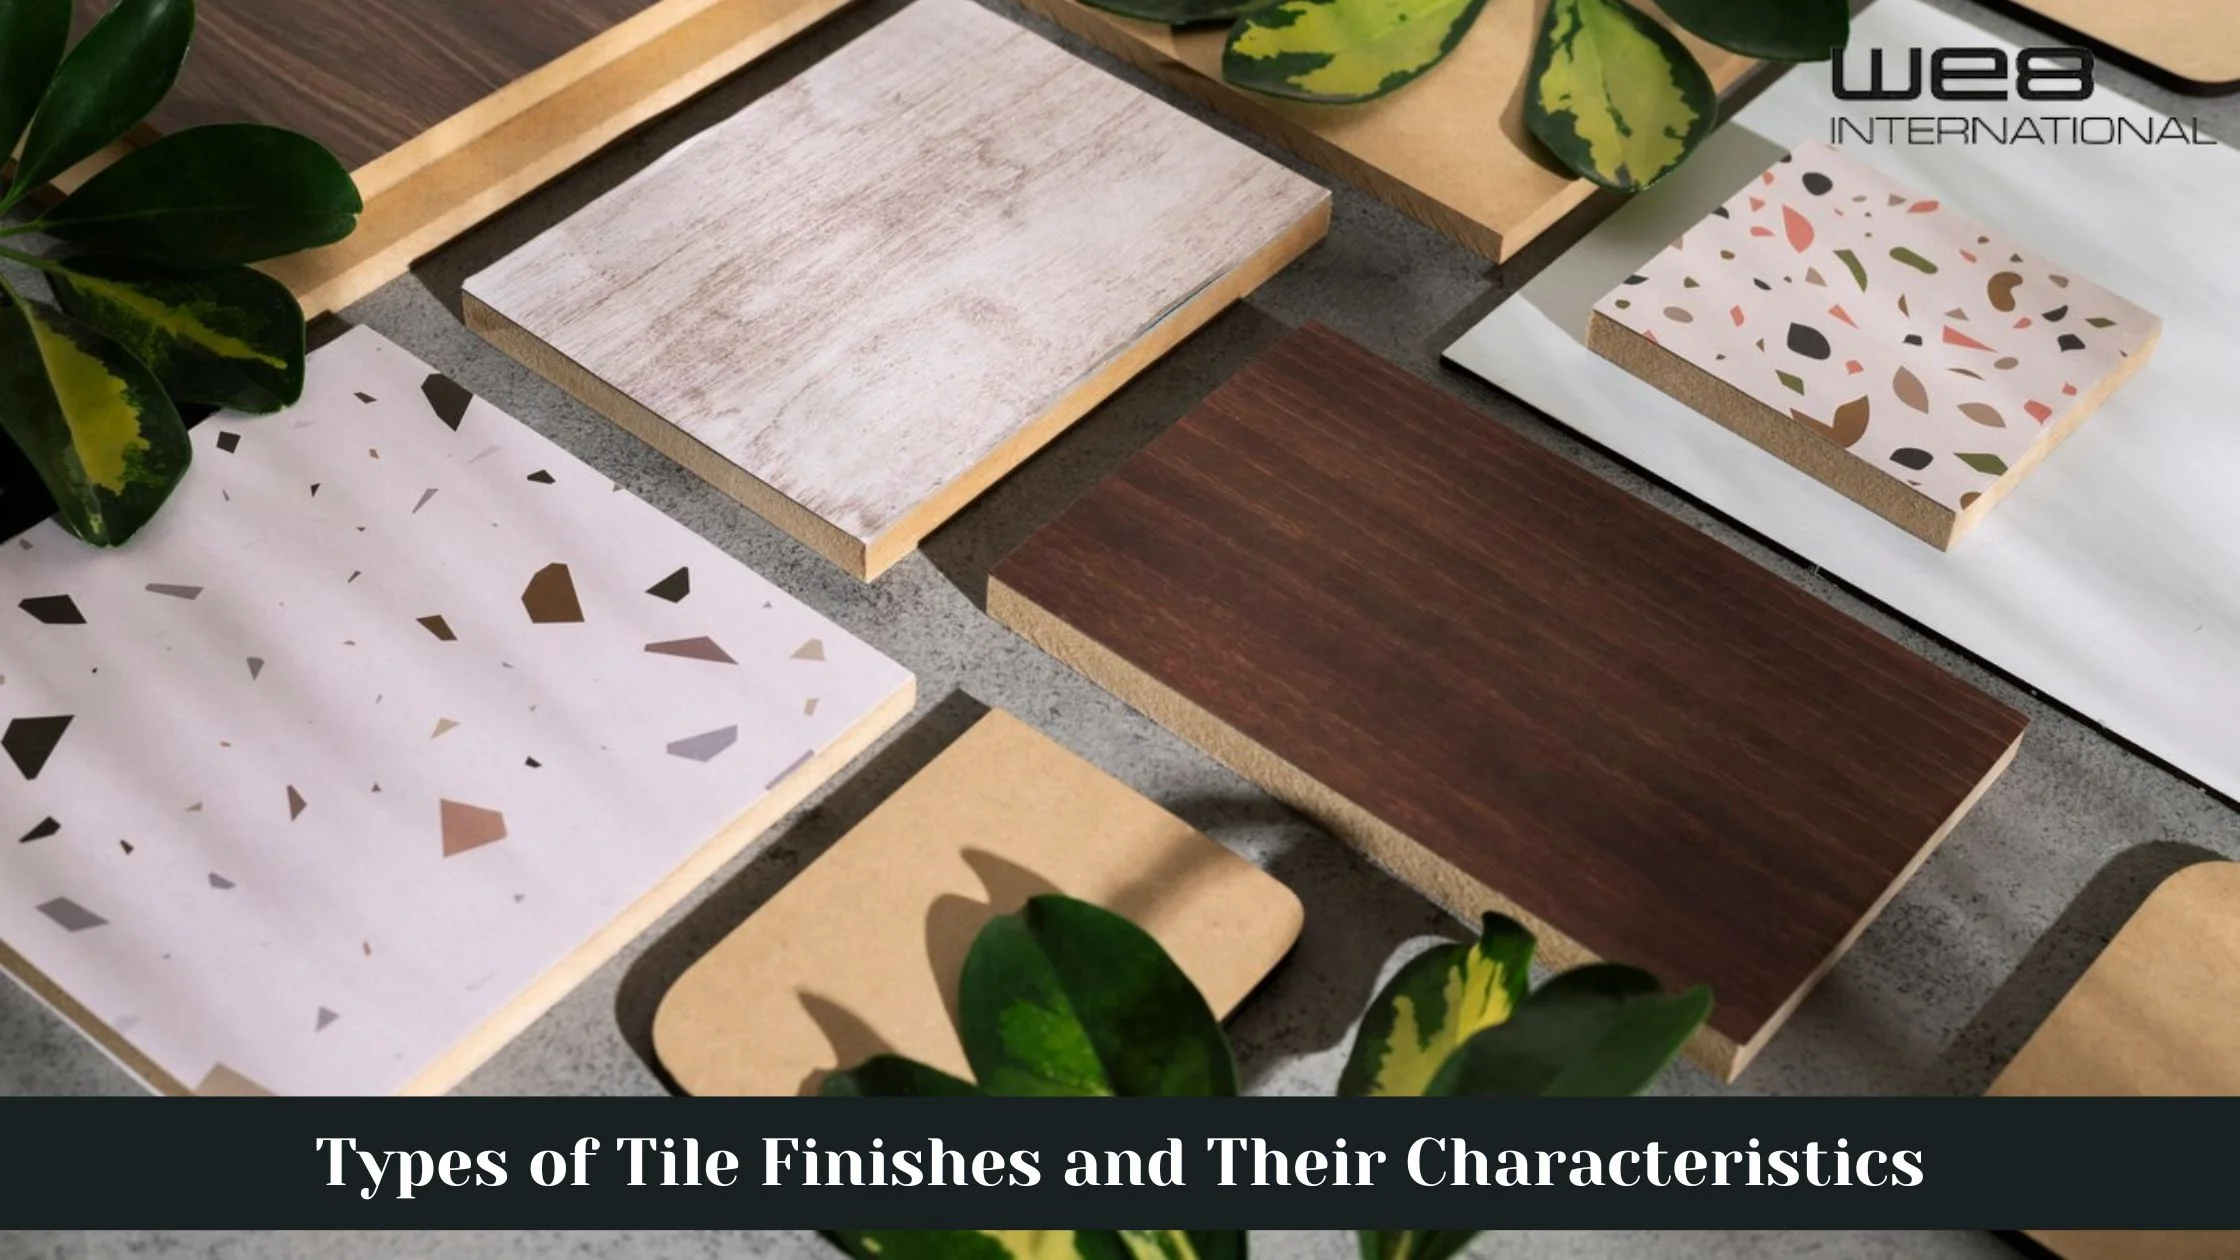 Types of Tile Finishes and Their Characteristics